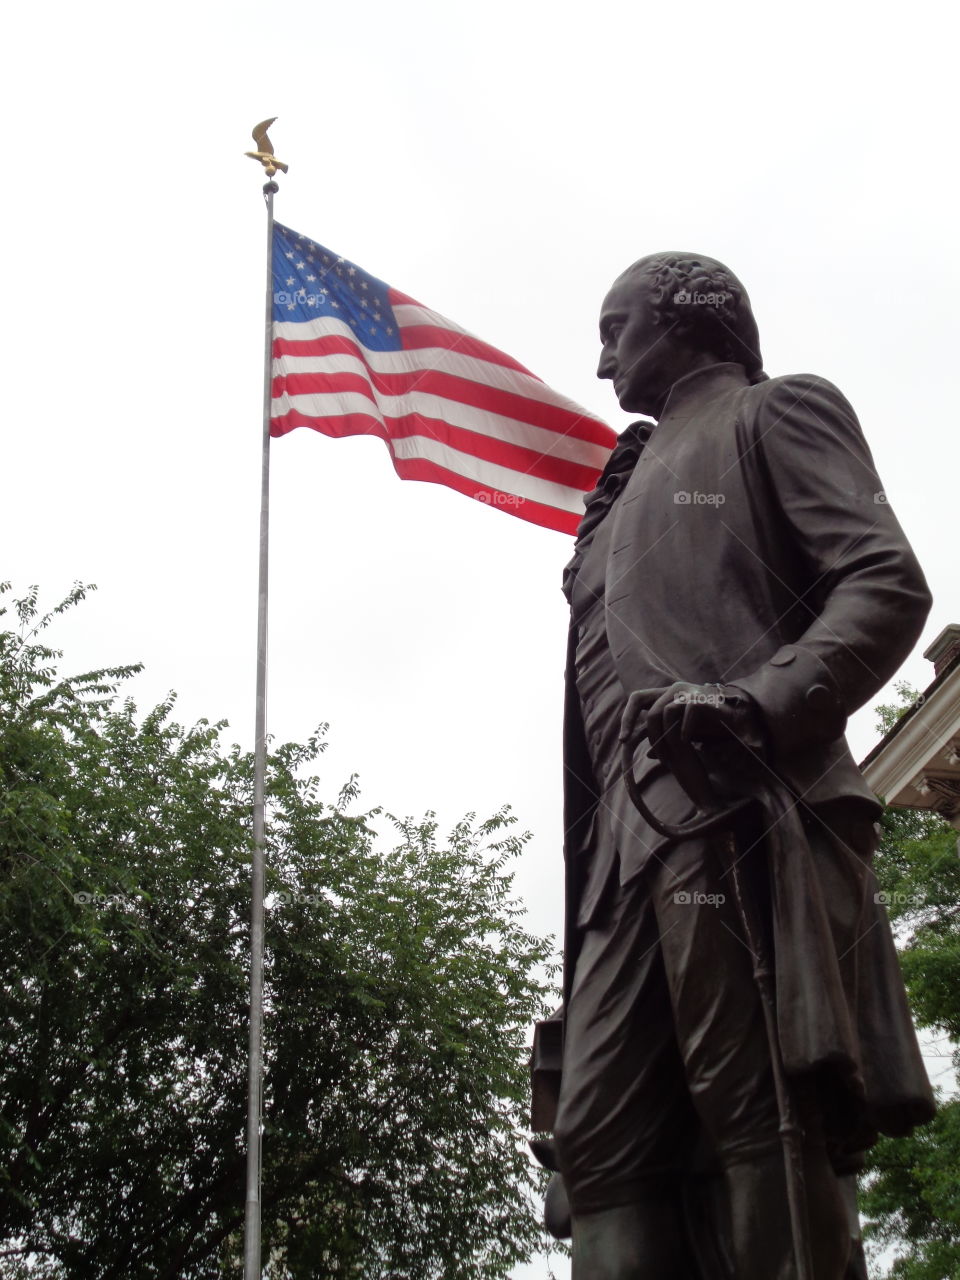 President Washington. Our first President proudly standing by our American flag.